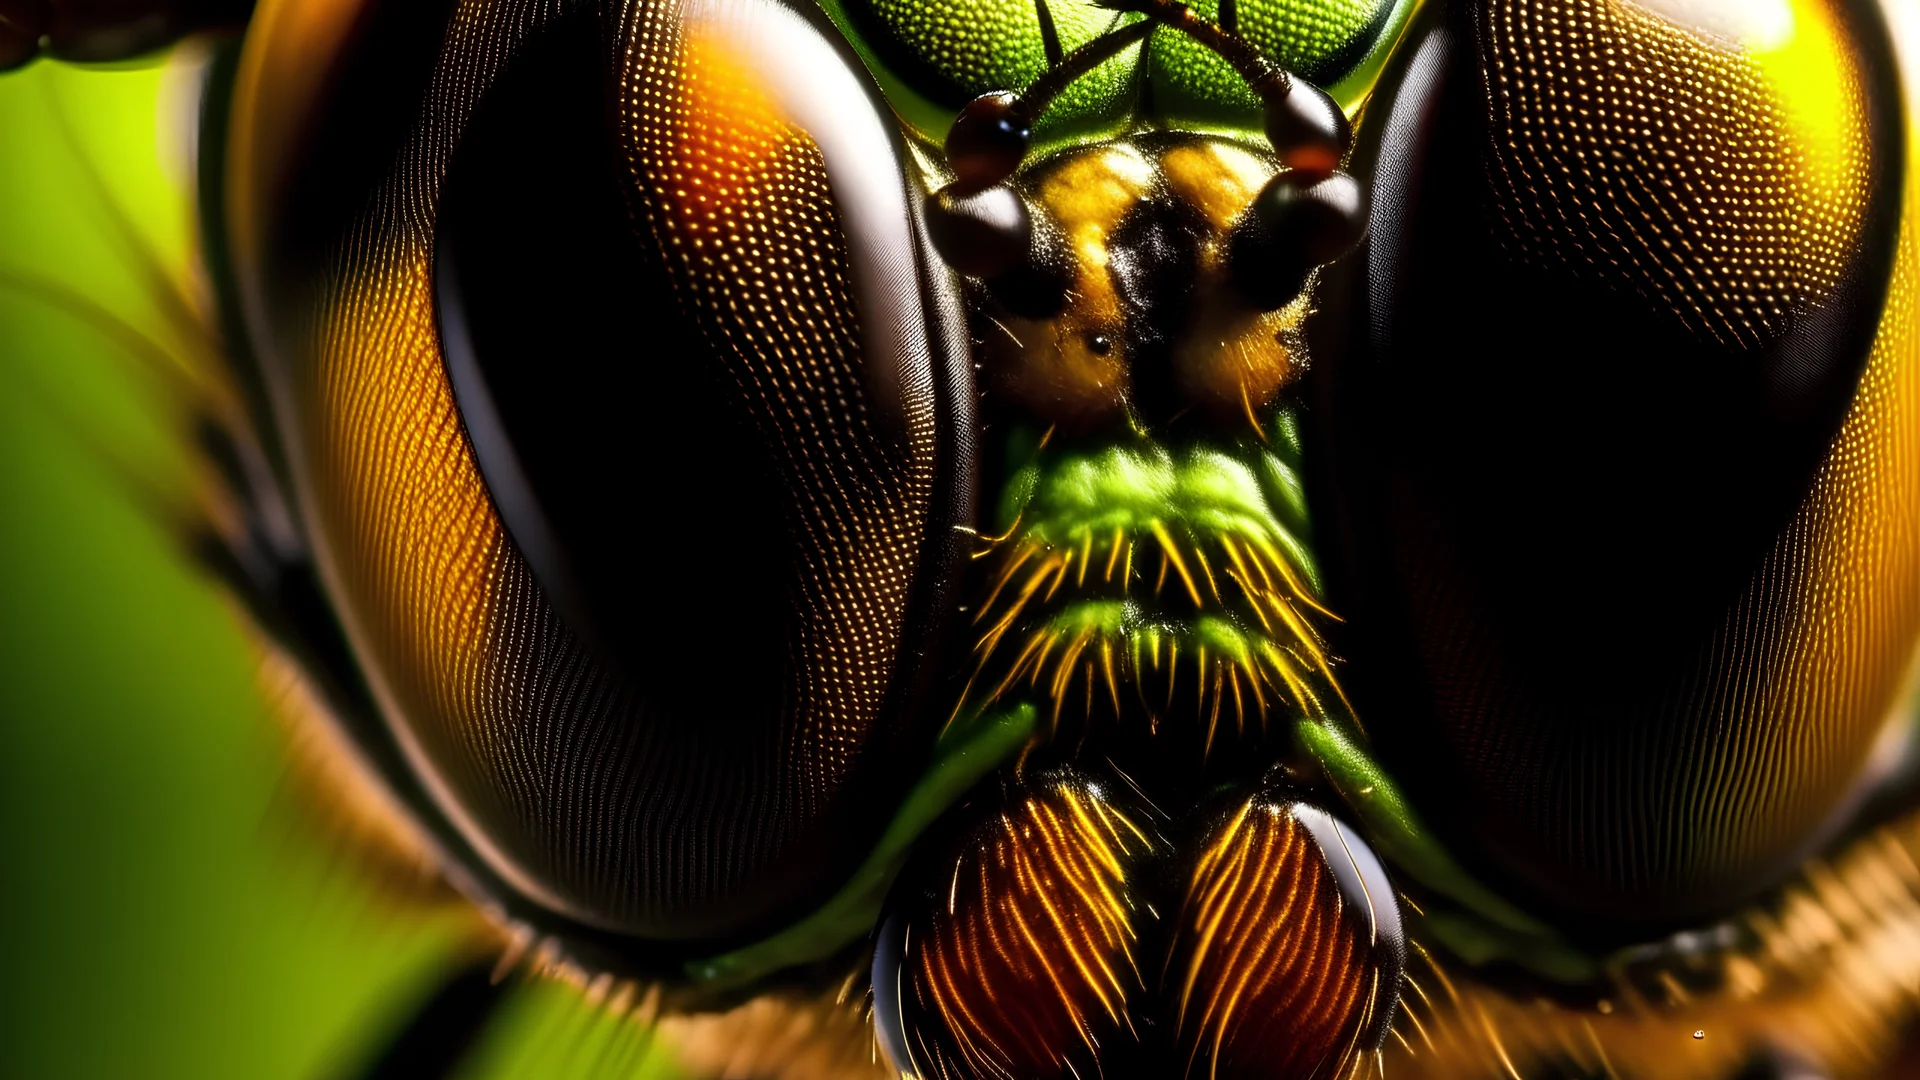 Soldier fly face extreme close up